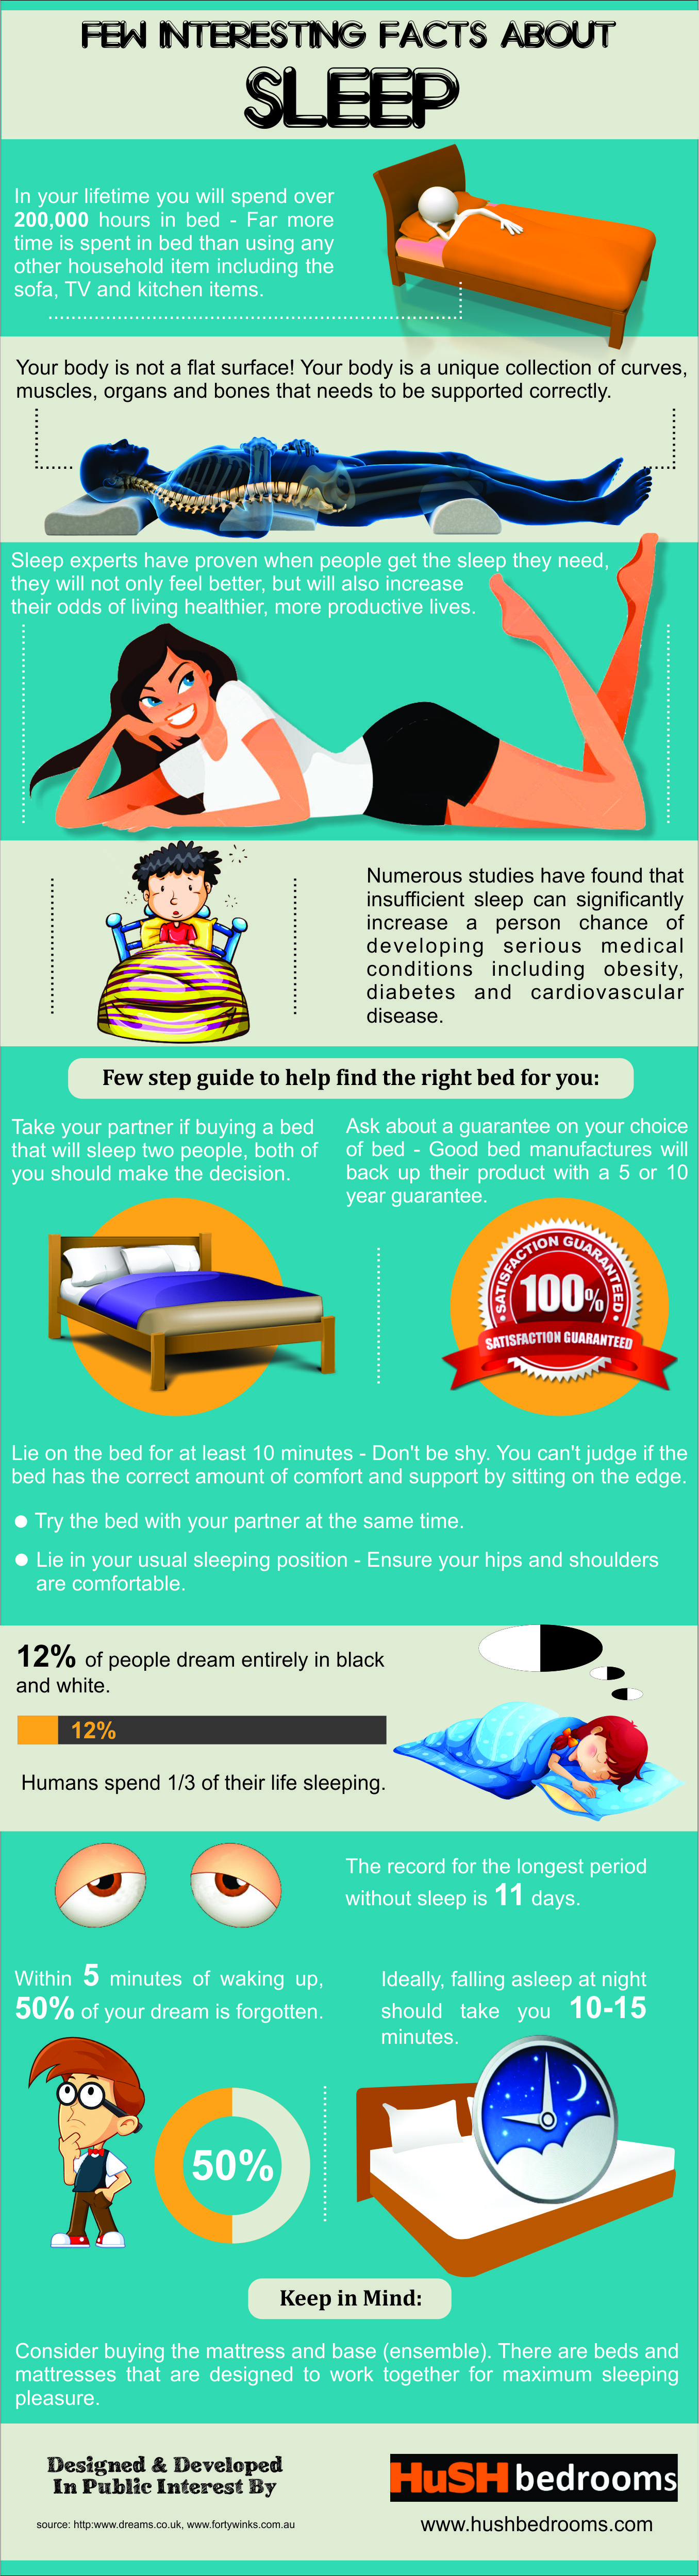 Interesting Facts about How We Sleep